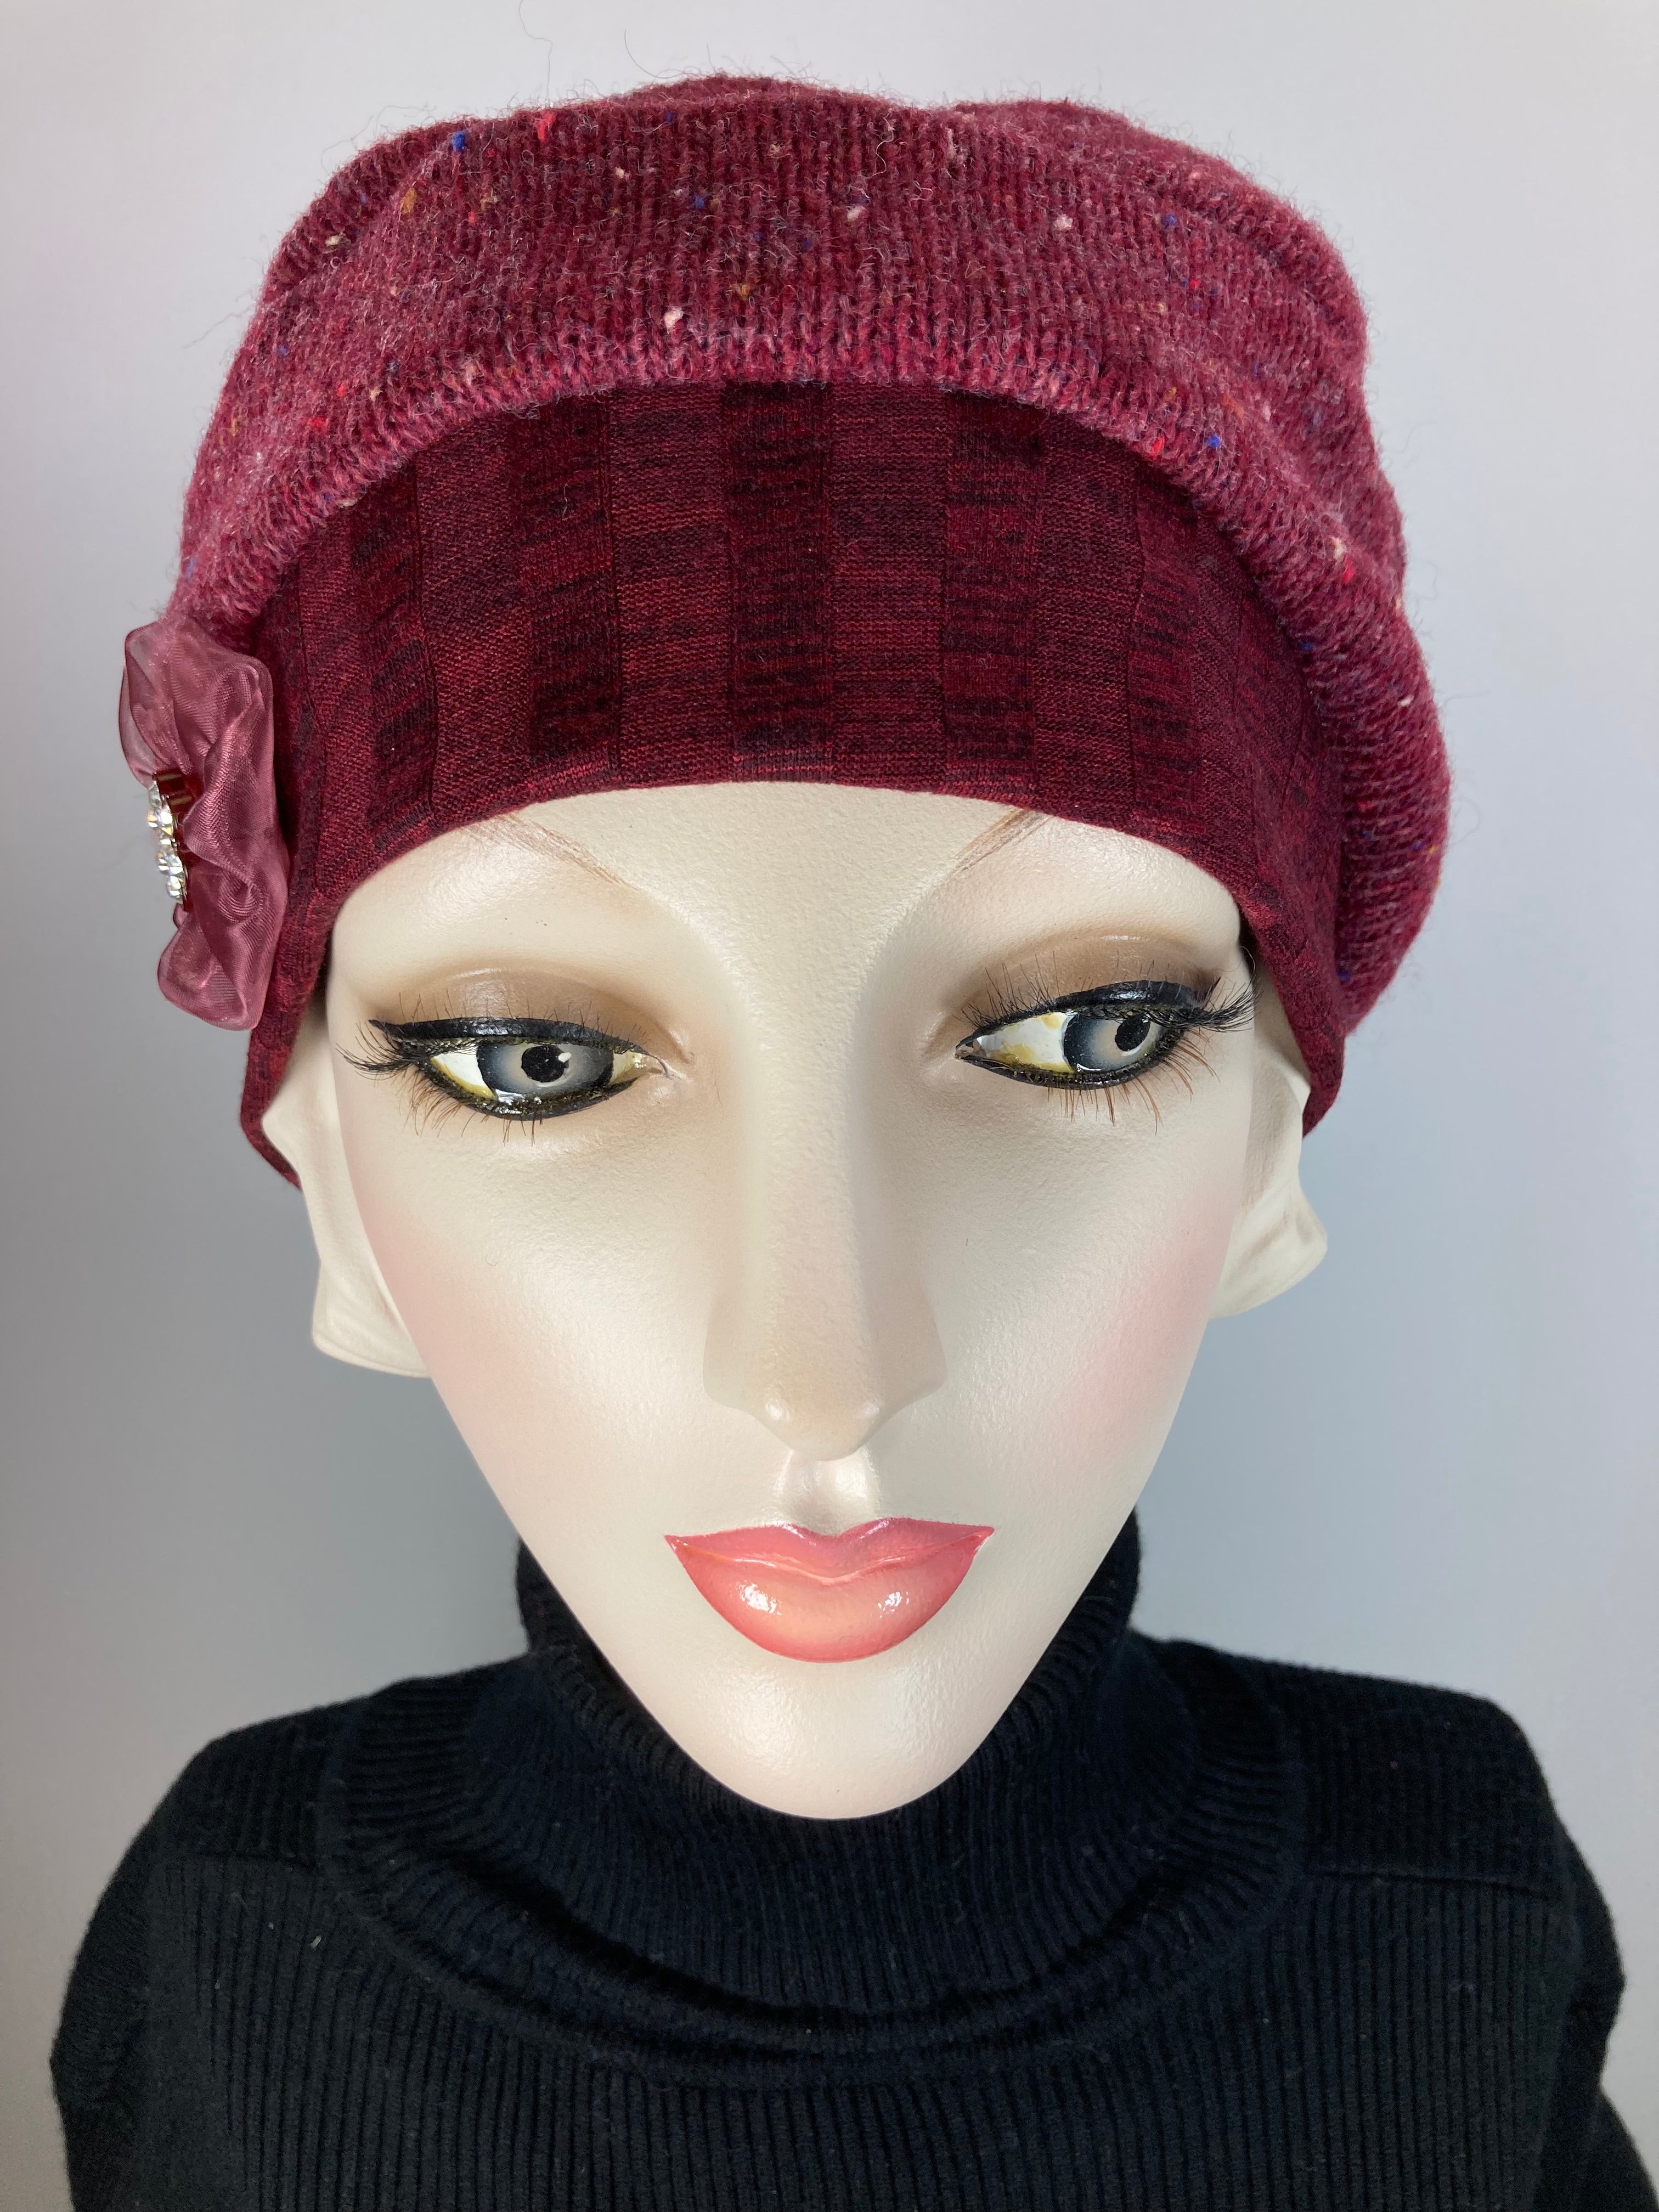 Womens Slouchy Beret. Knit burgundy Hat. Slouch Eco friendly Hat. Boho chic casual hat. Ladies travel hat. Stylish fabric hat. Sustainable